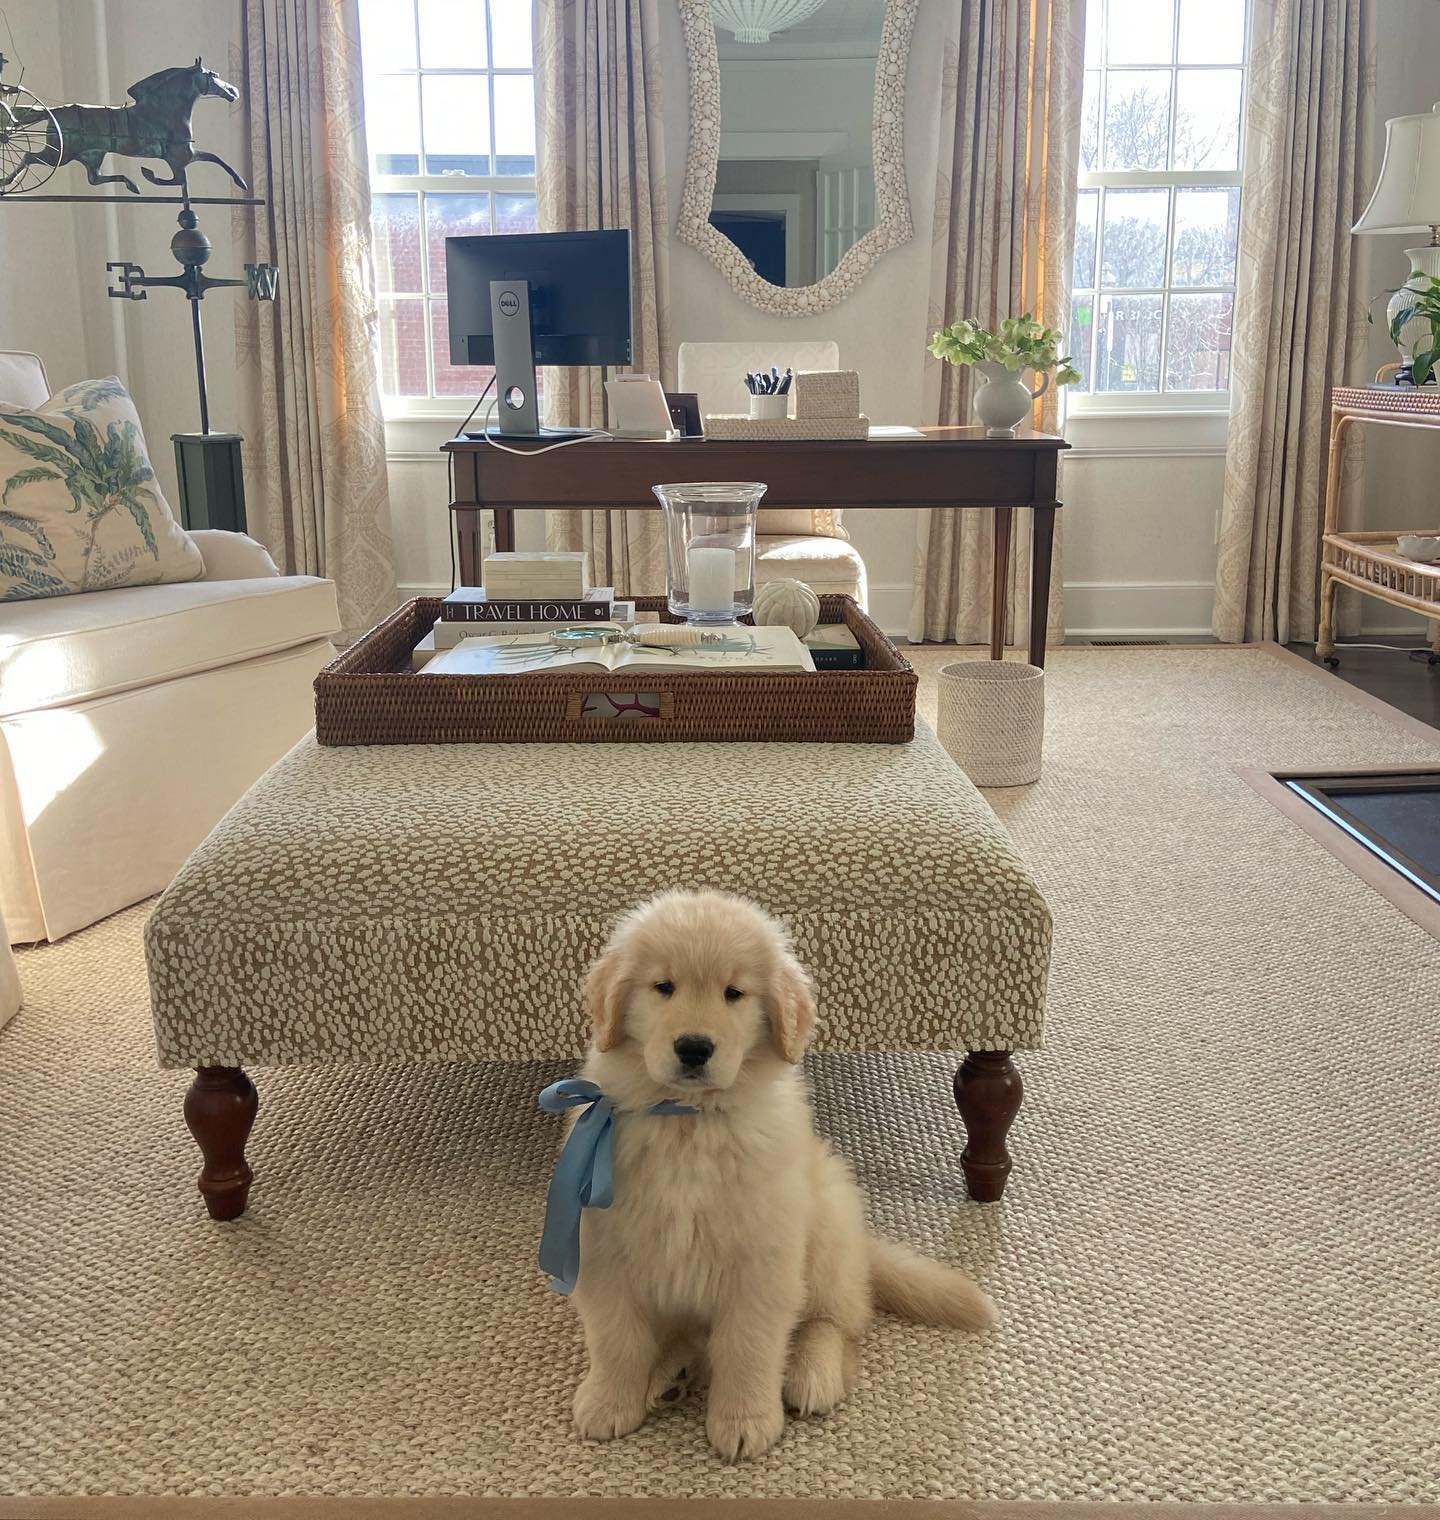 A week ago we brought this little golden nugget home.  We immediately fell in love with his cute personality and sweet ways.  Today he visited our studio for the first of many times.  Welcome to AGA Interior Design, Mulligan! 🩵